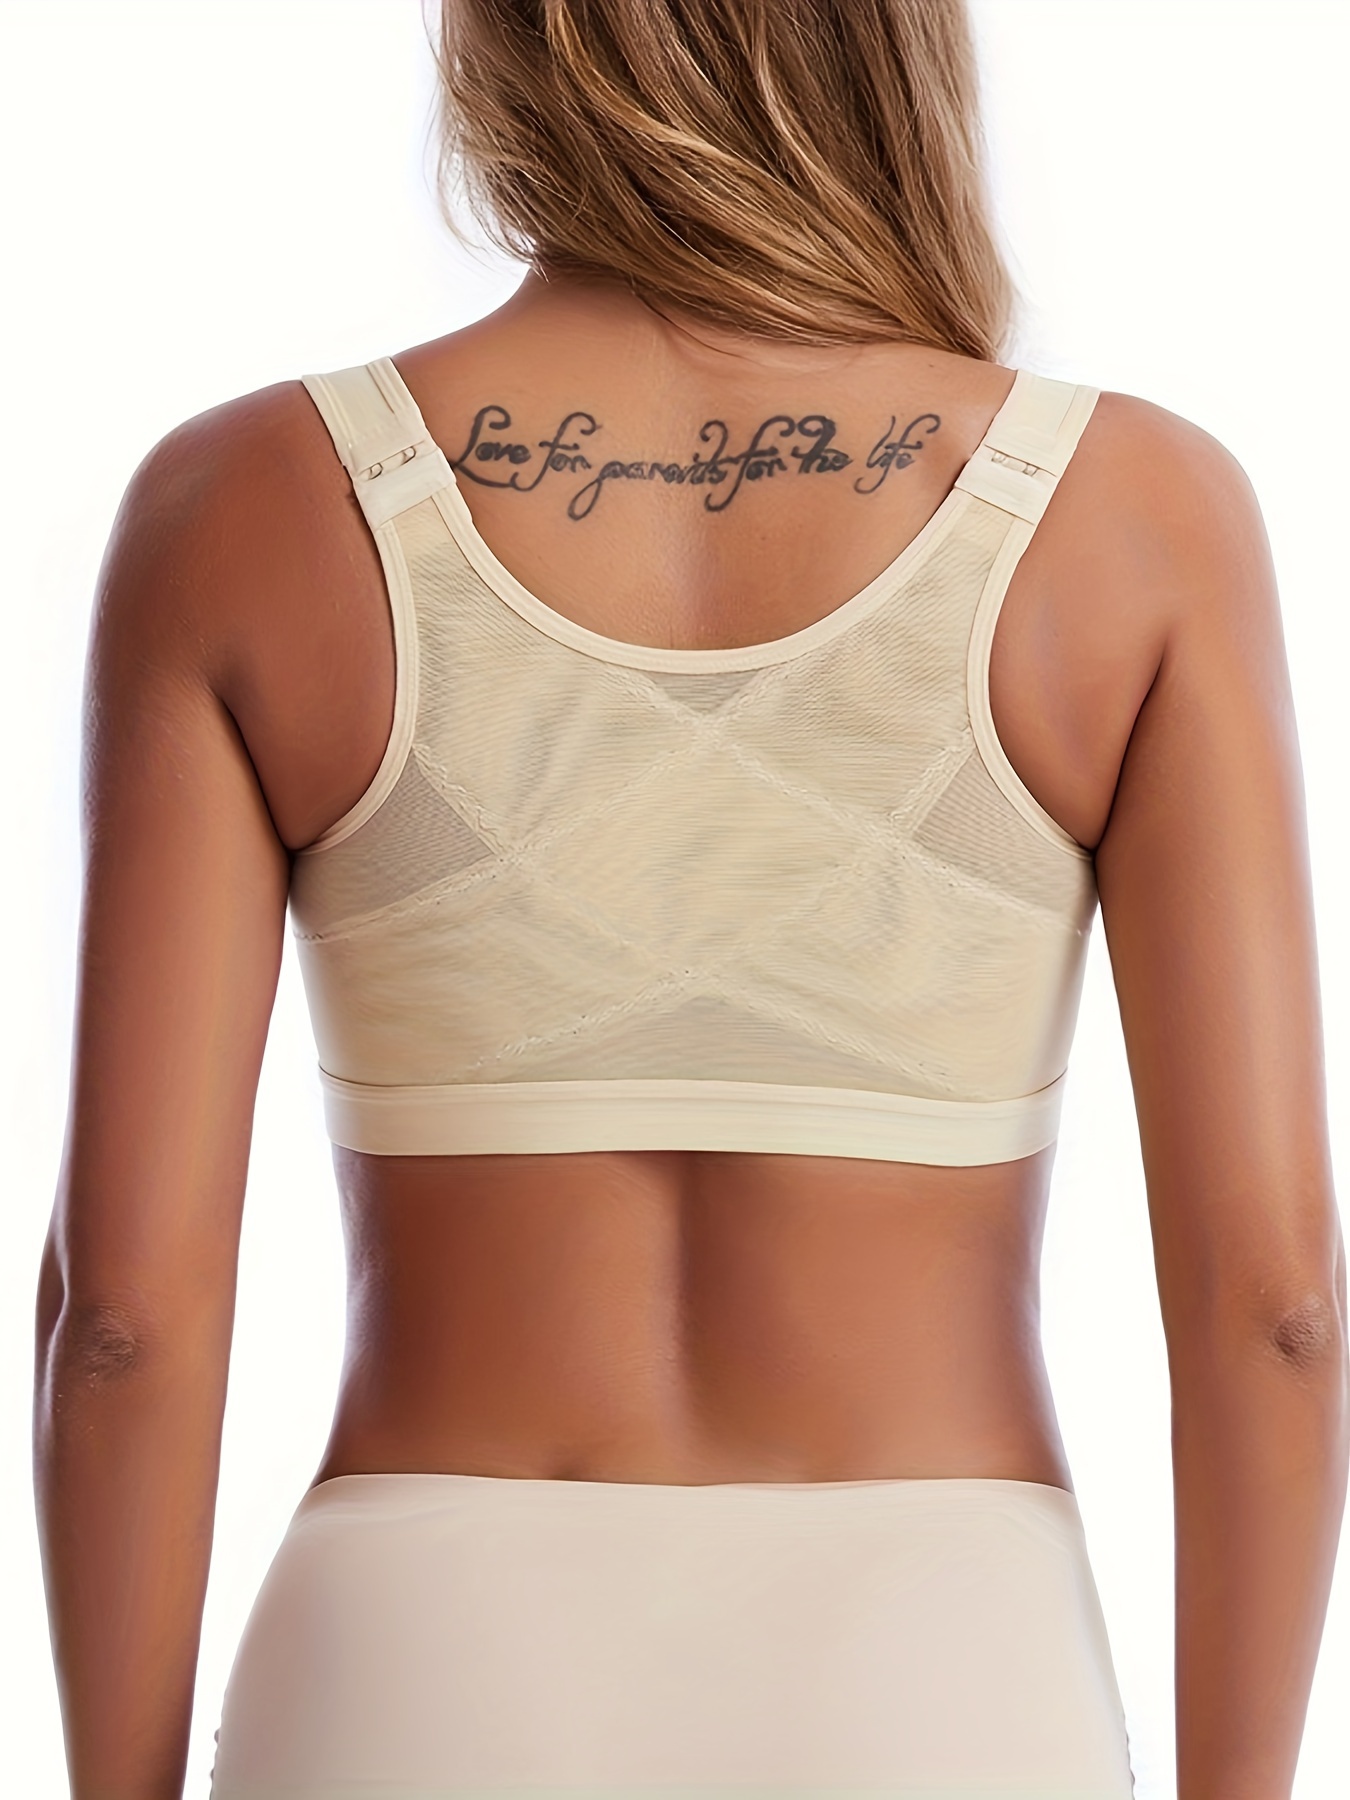 Front Closure Sports Bra, Comfy & Breathable Racer Back Adjustable Daily  Bra, Women's Lingerie & Underwear